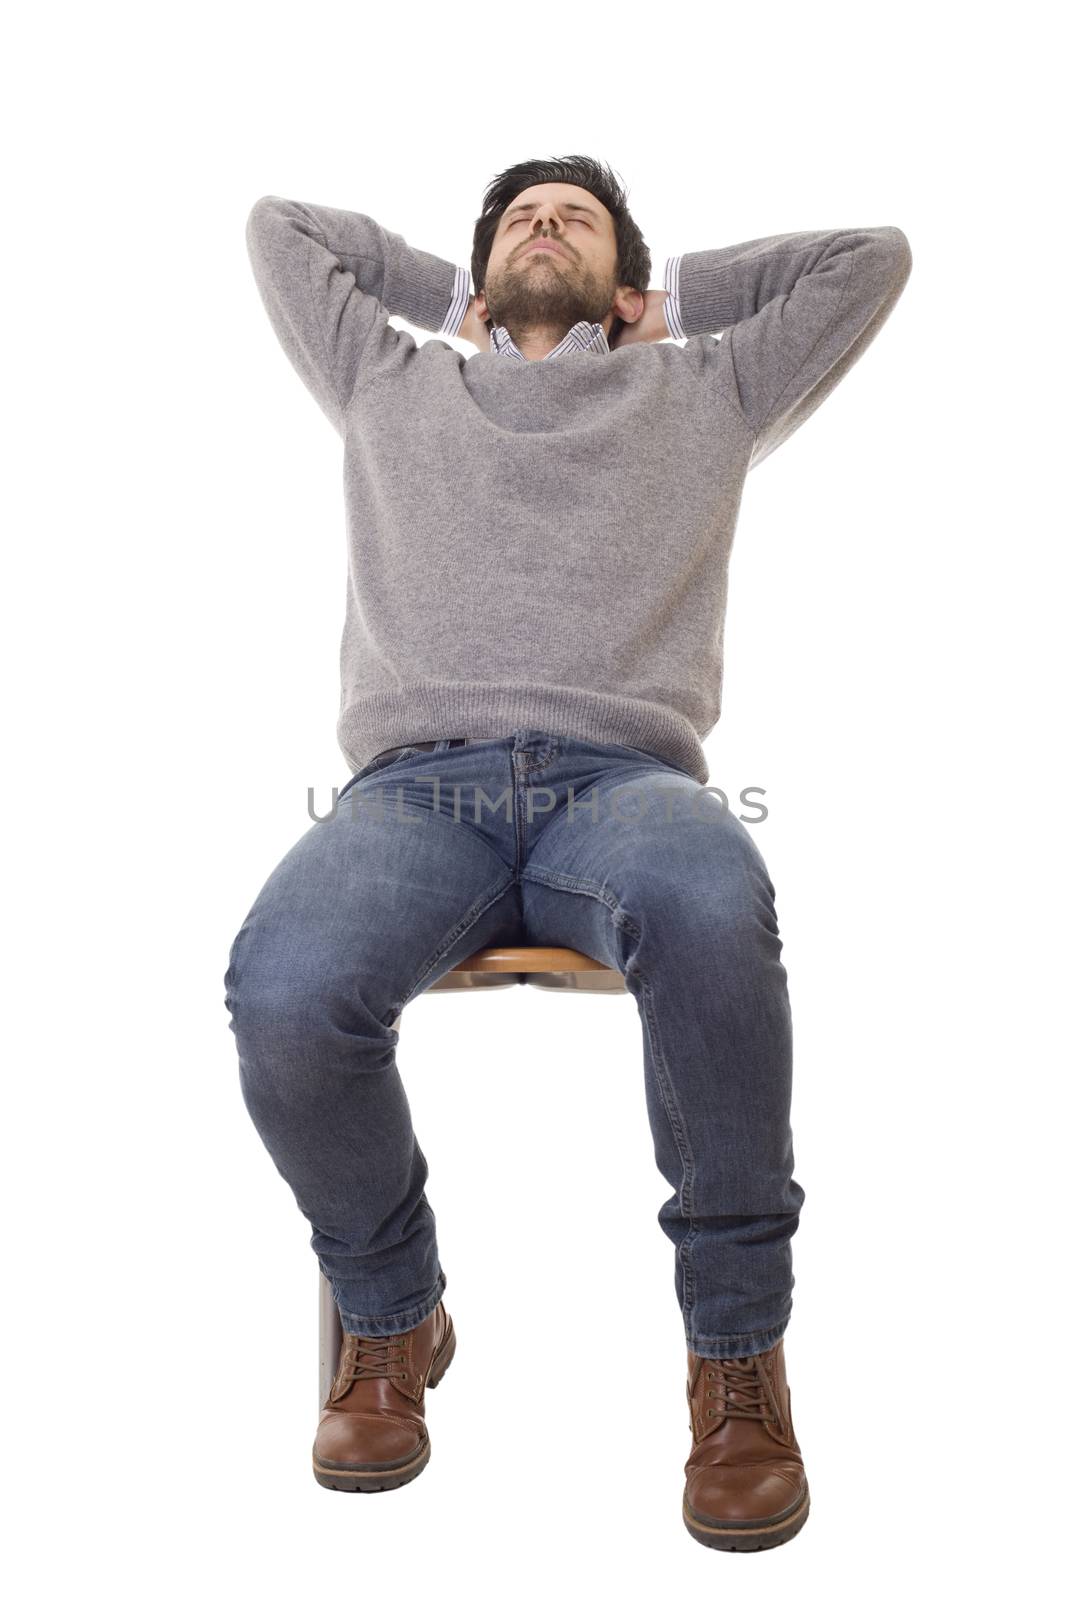 casual man sleeping on a chair, isolated on white background